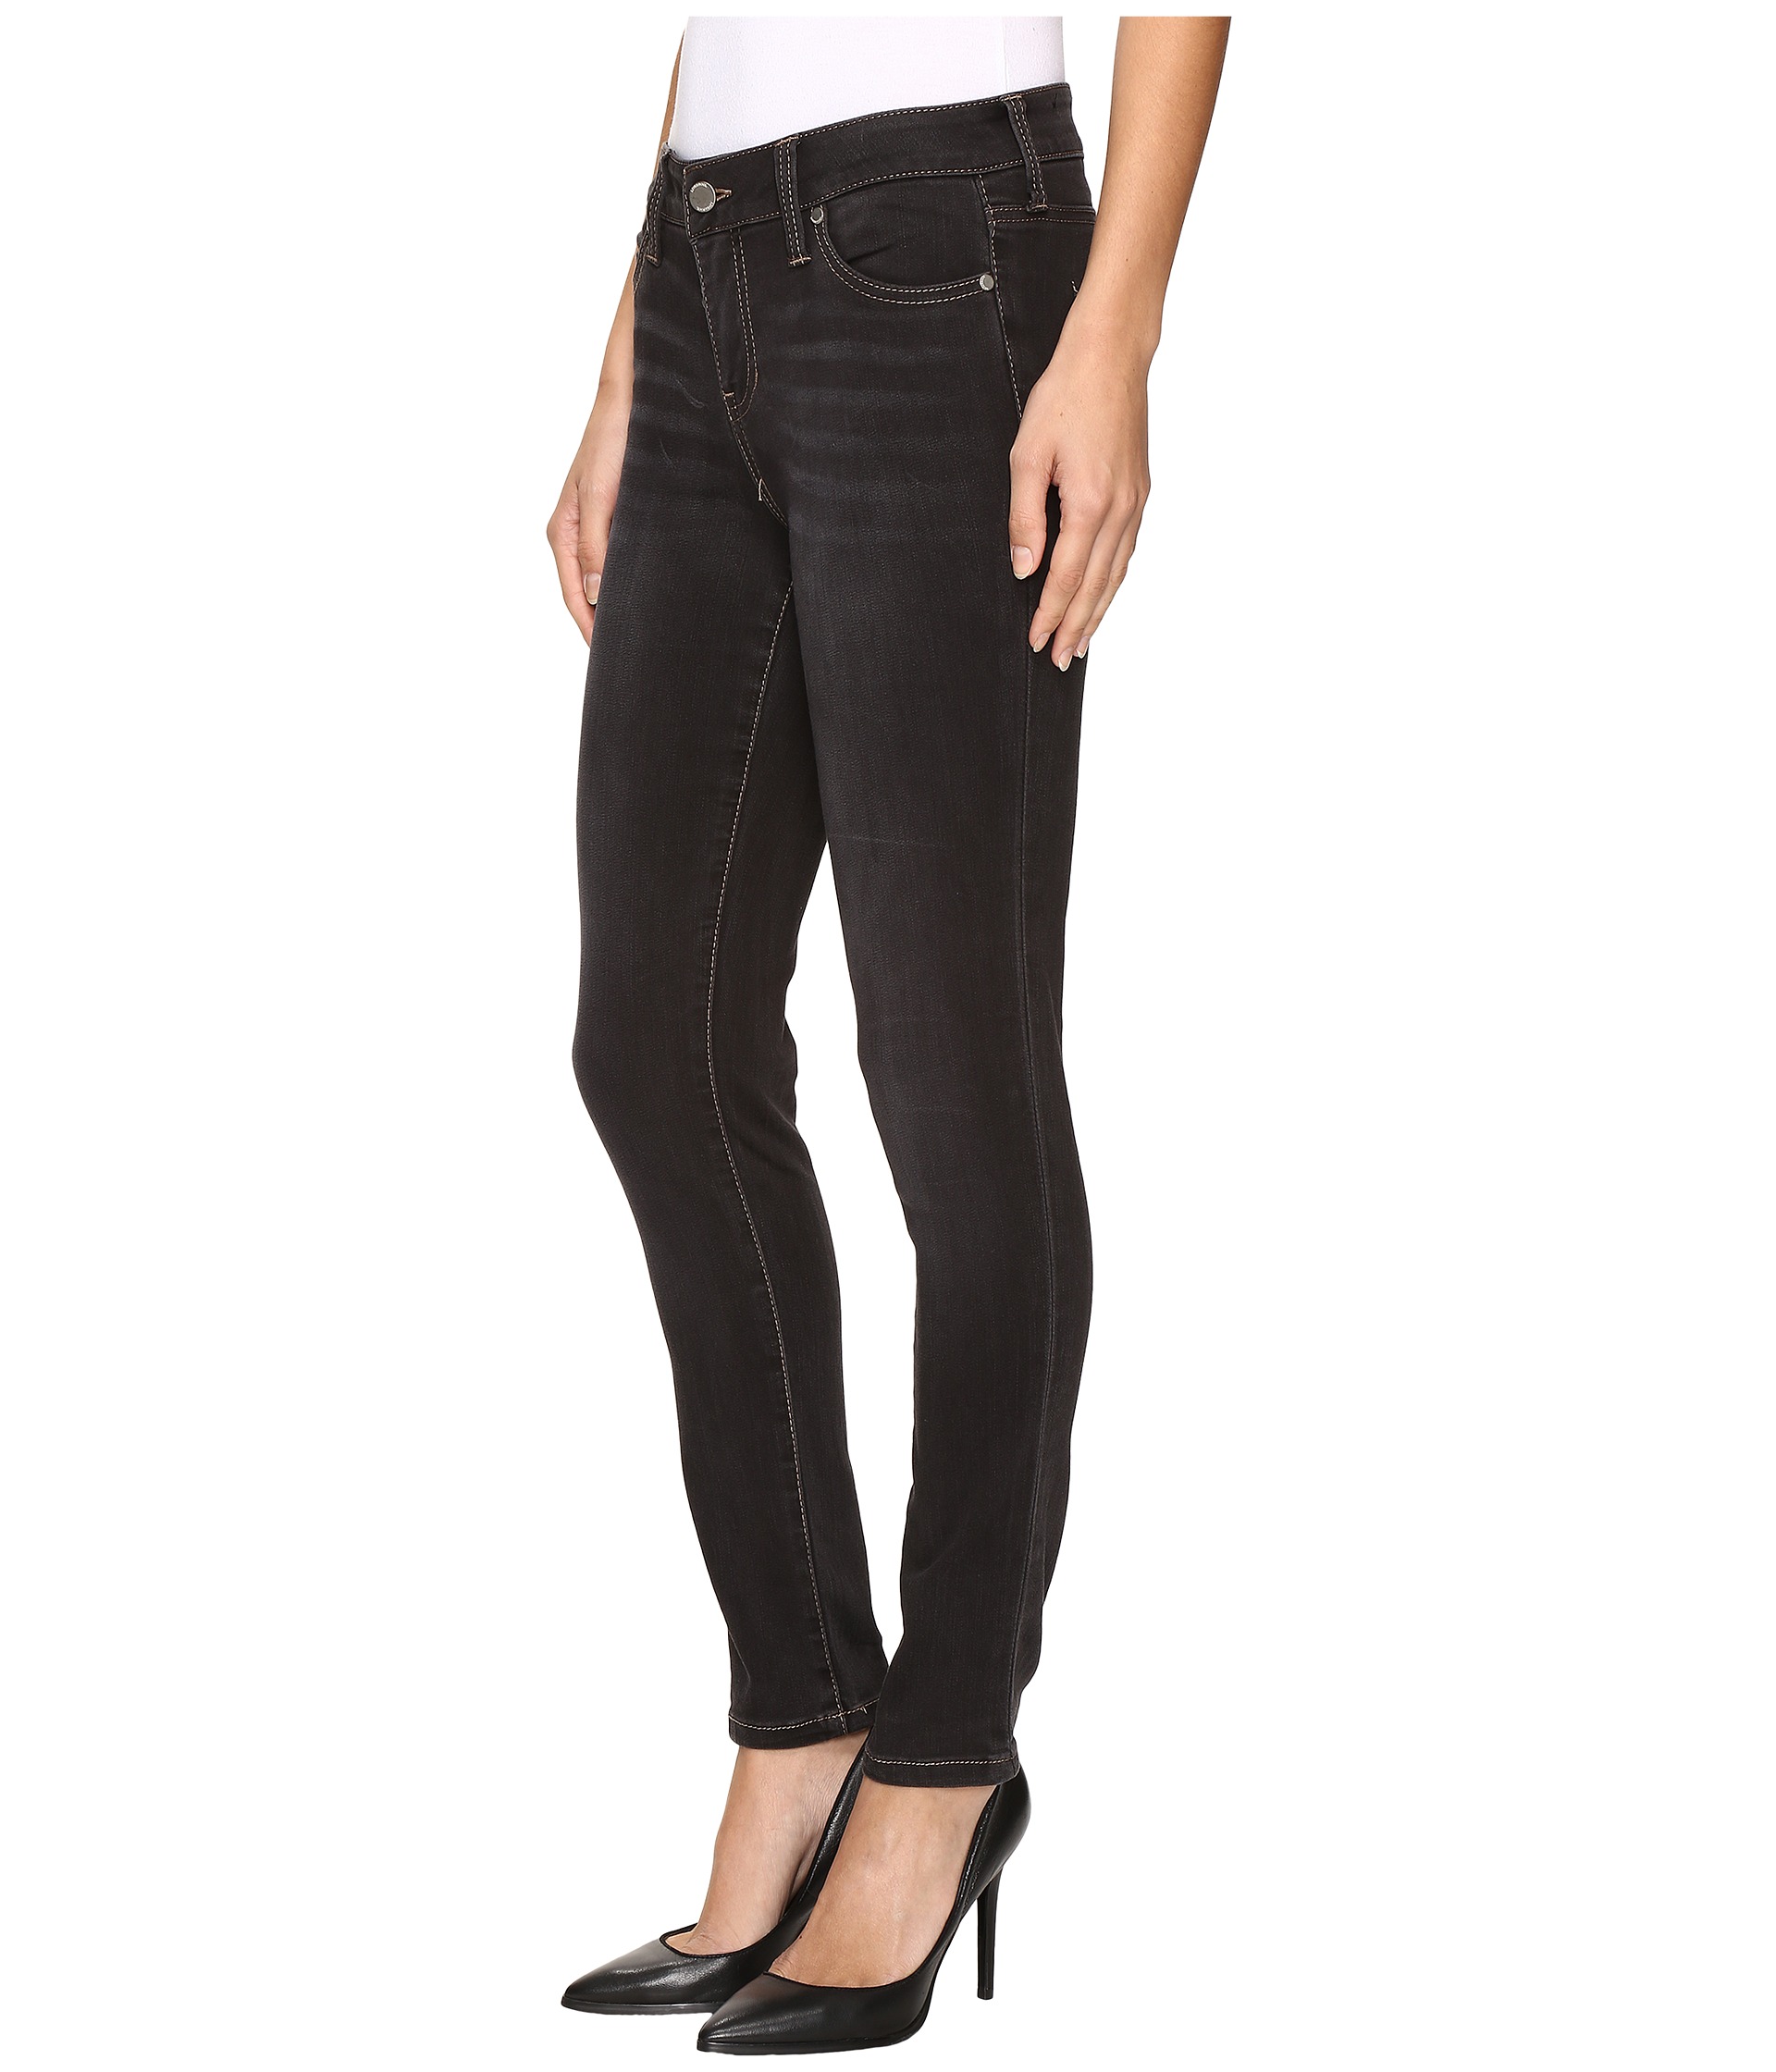 Liverpool Petite Abby Skinny Jeans in Sulphur Grey Wash at Zappos.com